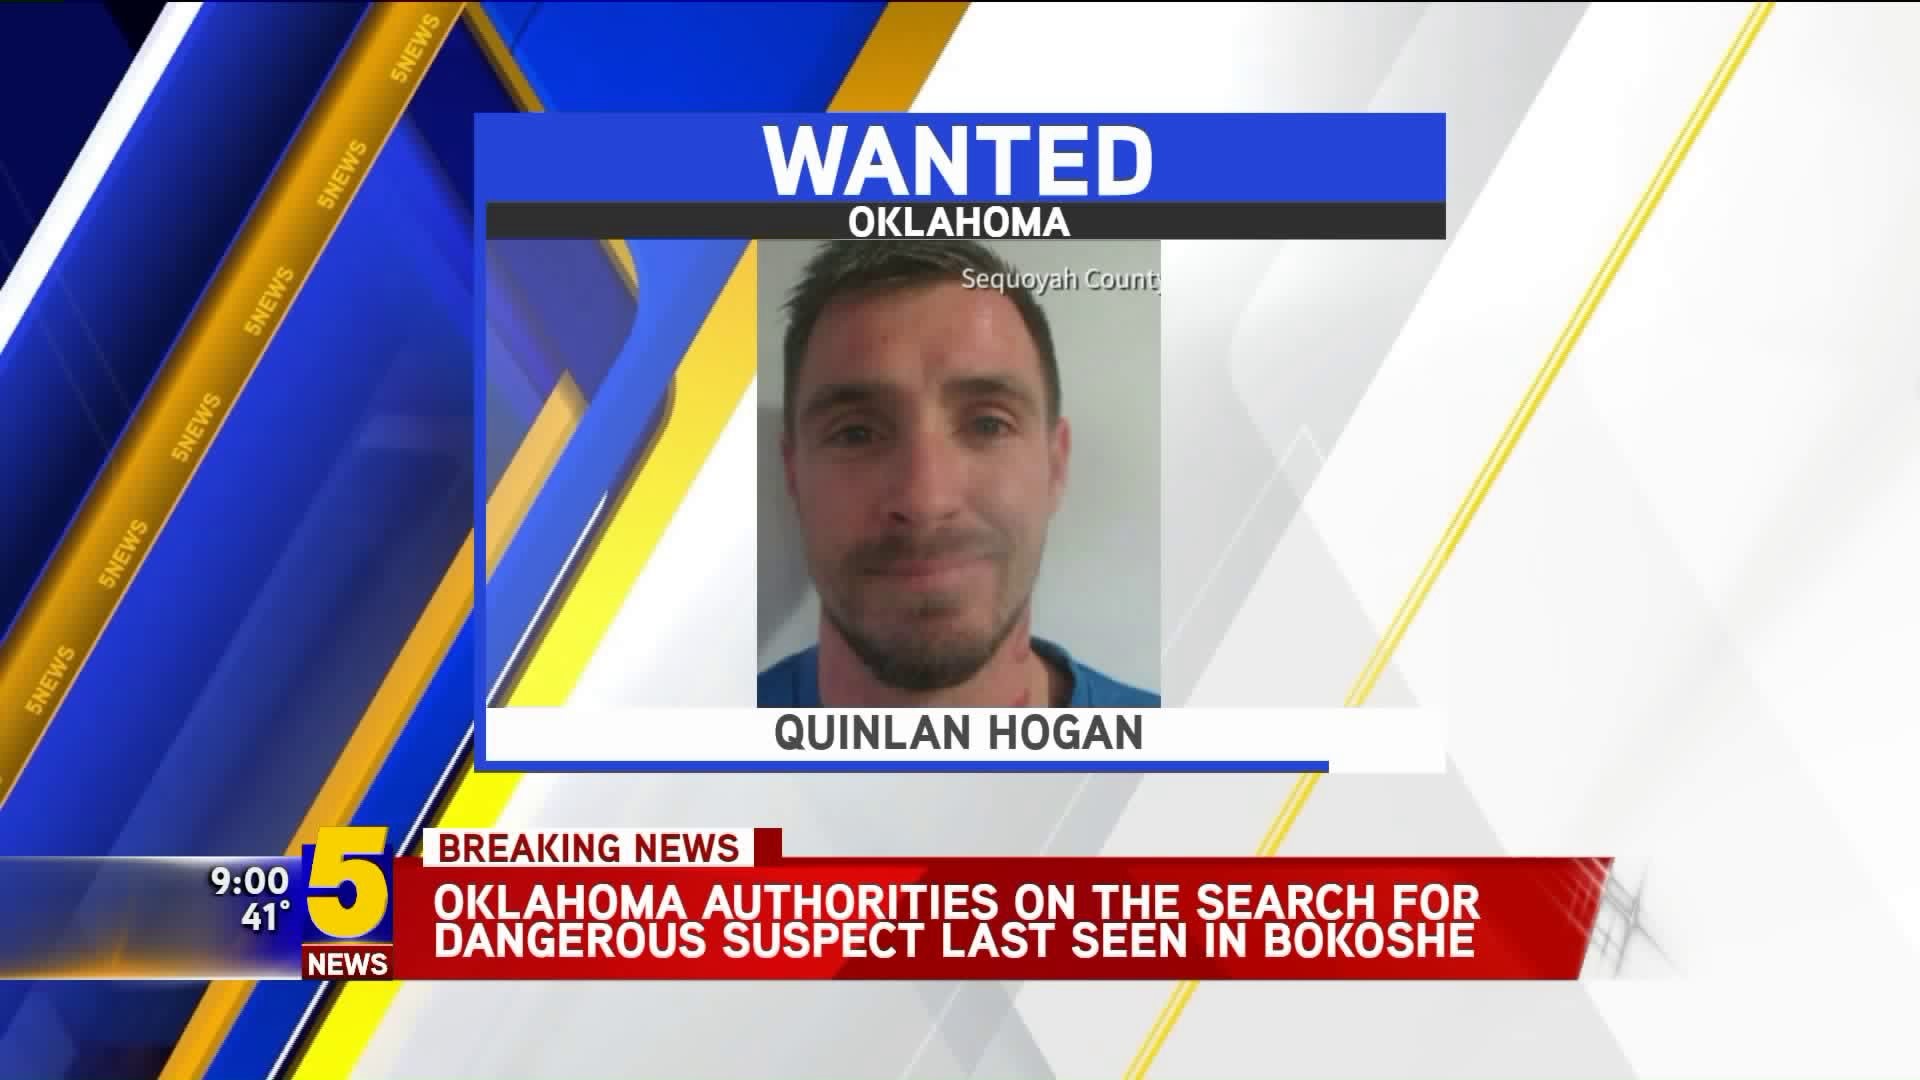 Oklahoma authorities on the search for dangerous suspect